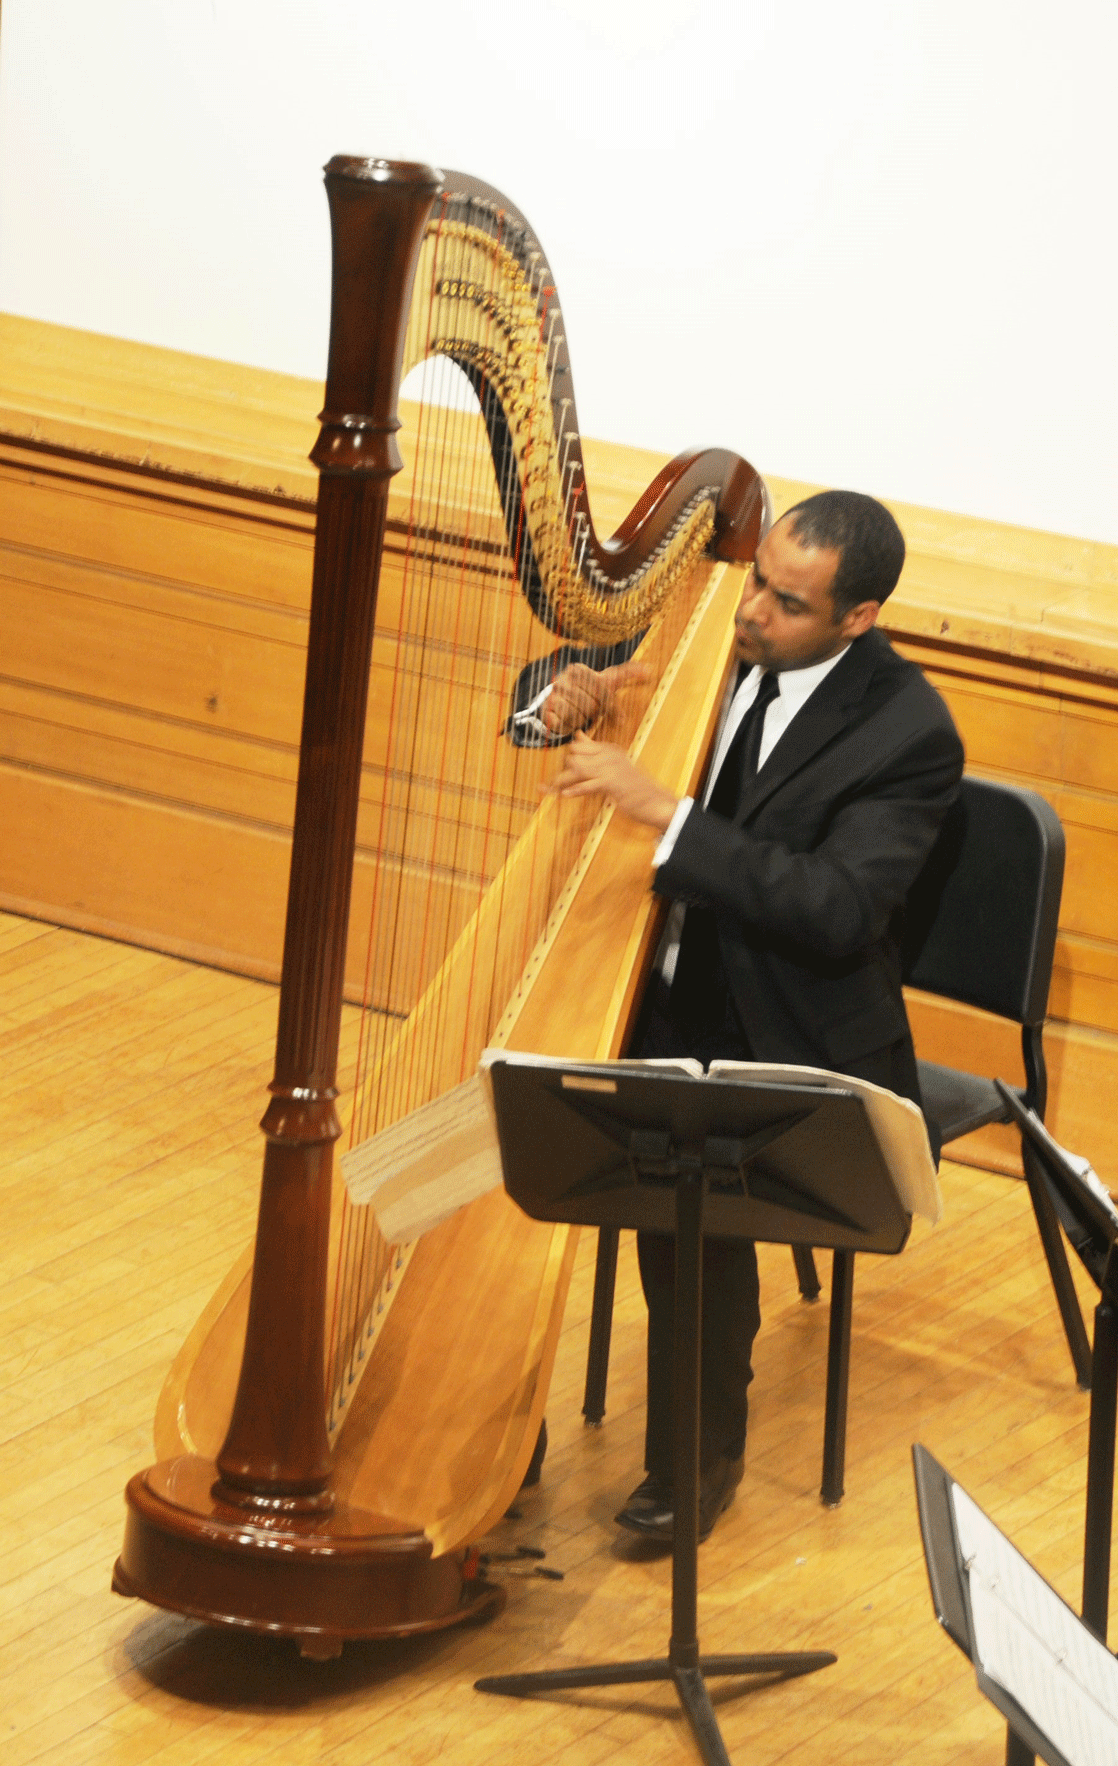 Harpist Adán Vásquez performing during Memorial Tribute Concert for Tilsia Brens on  December 17, 2010 at The City College of New York